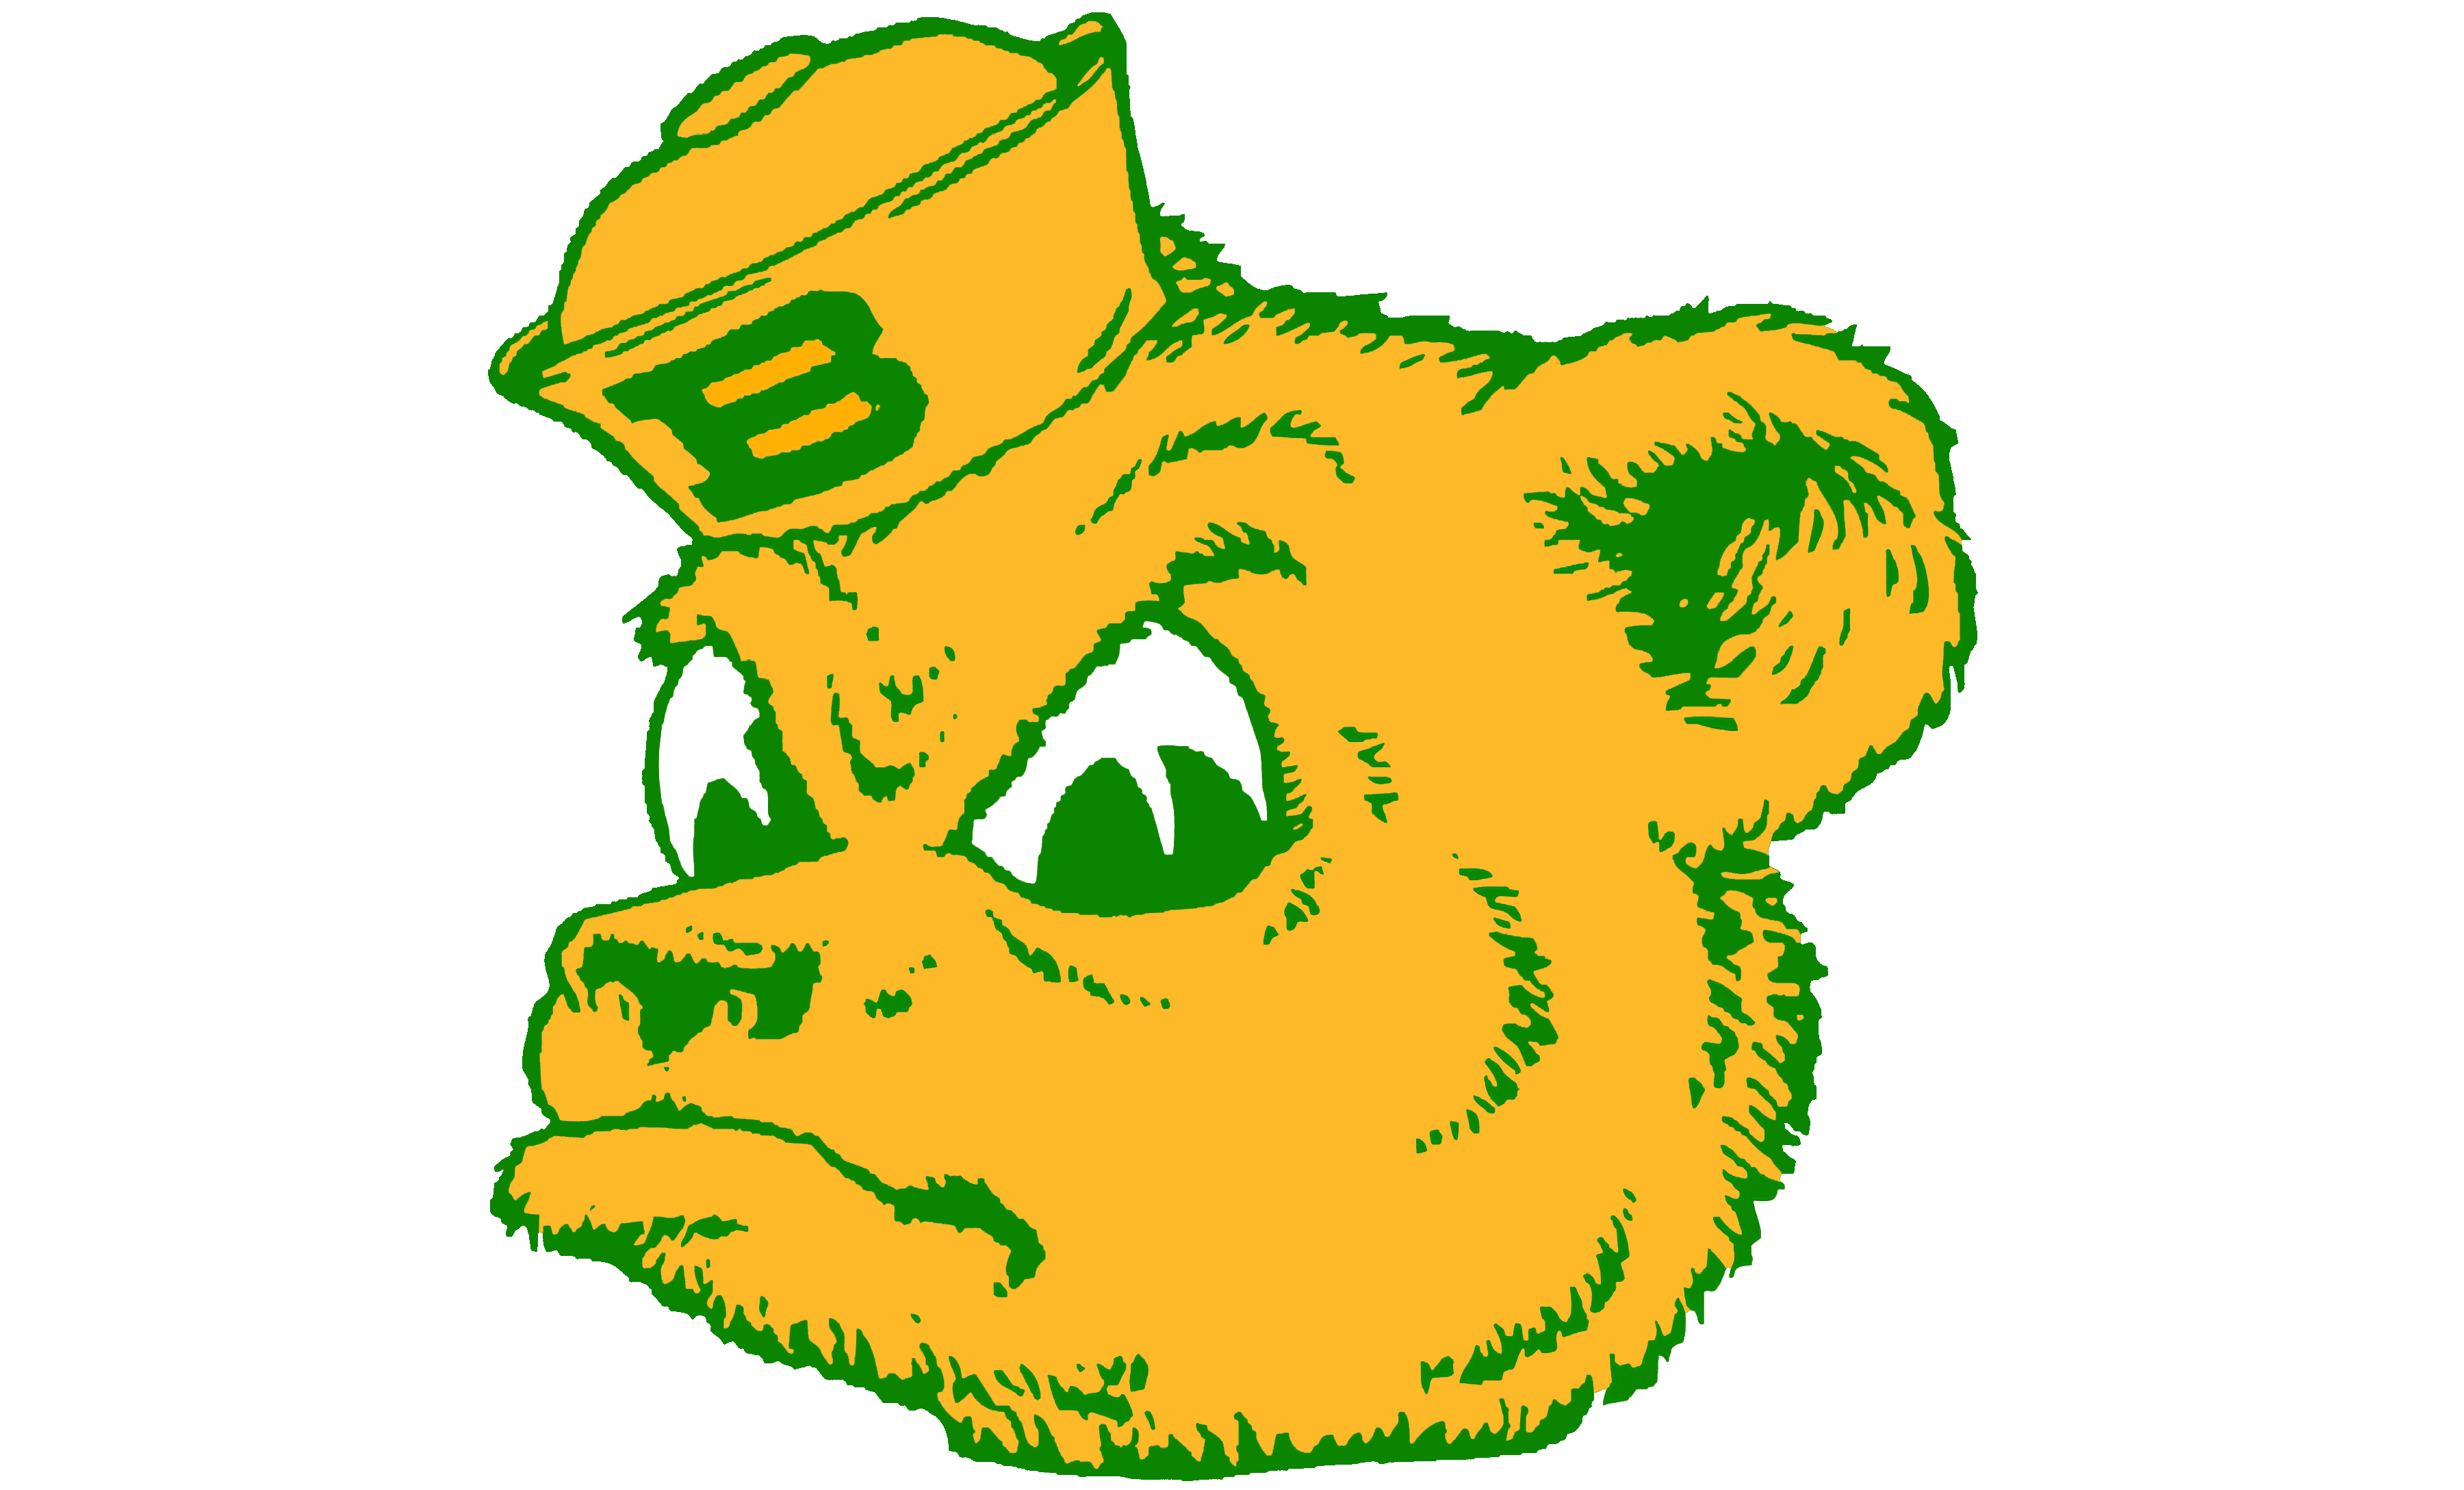 Baylor Bears Logo and symbol, meaning, history, PNG, brand